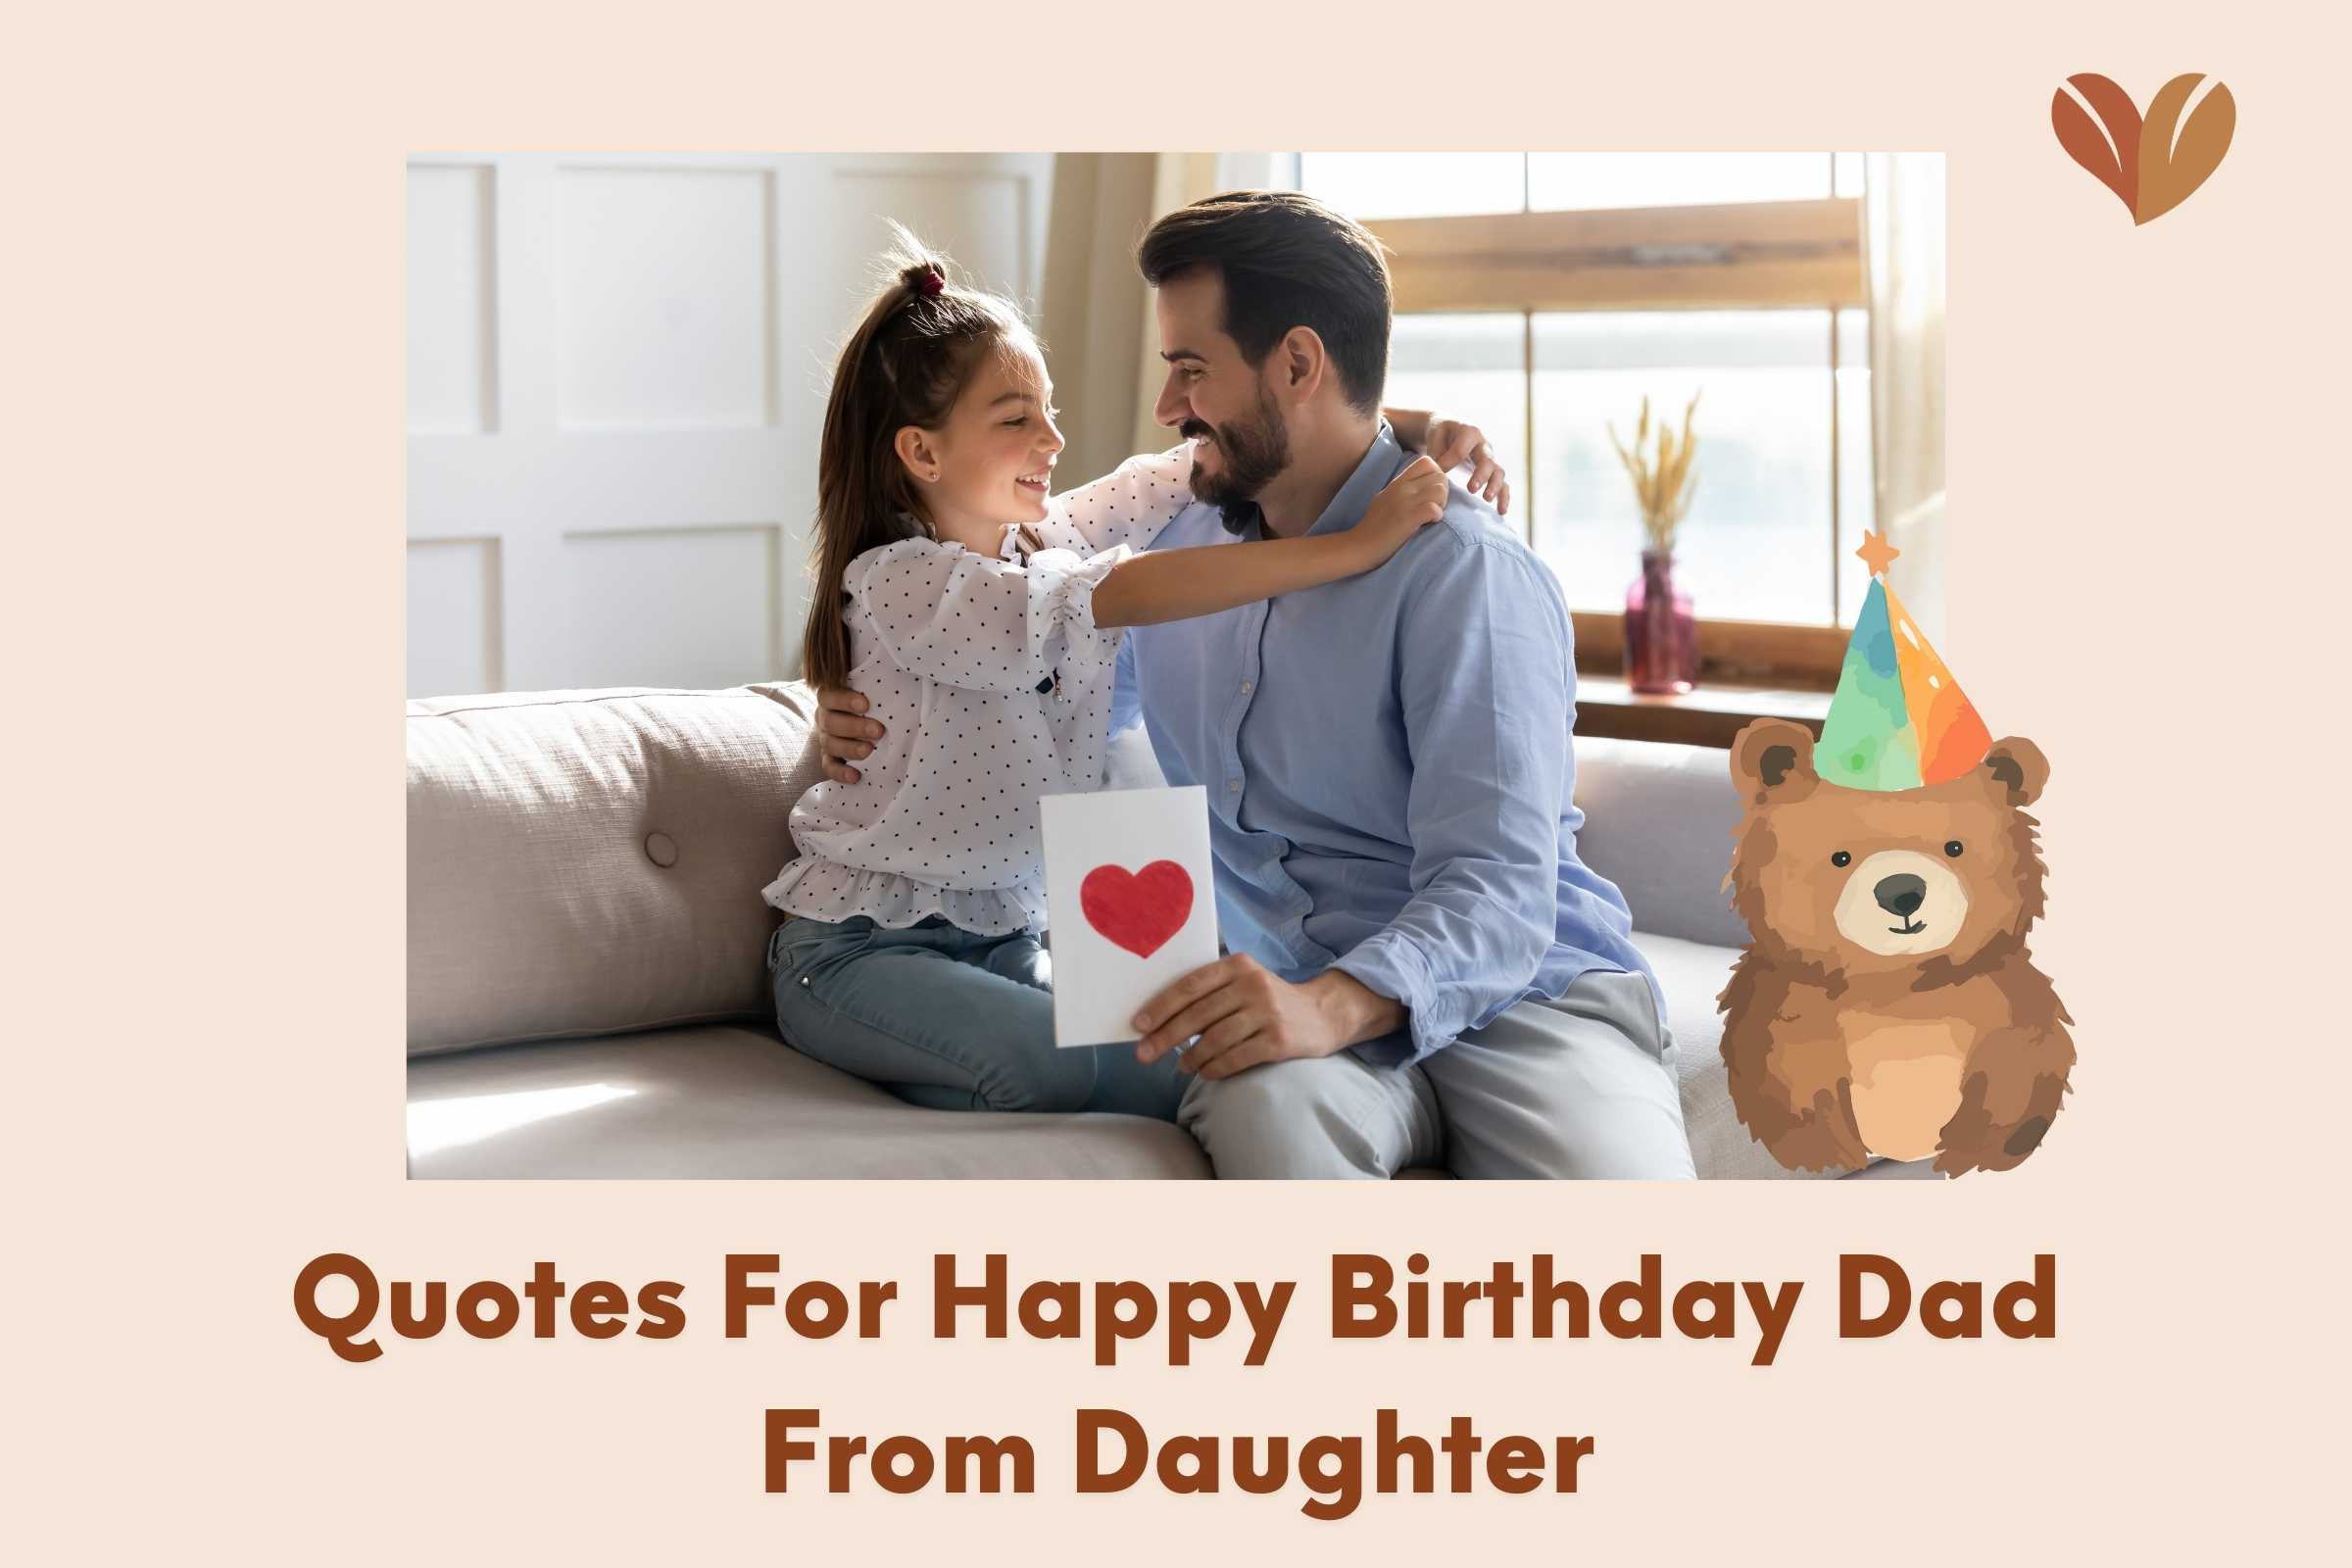 Dad's special day celebrated with love and 'happy birthday dad from daughter' wishes.